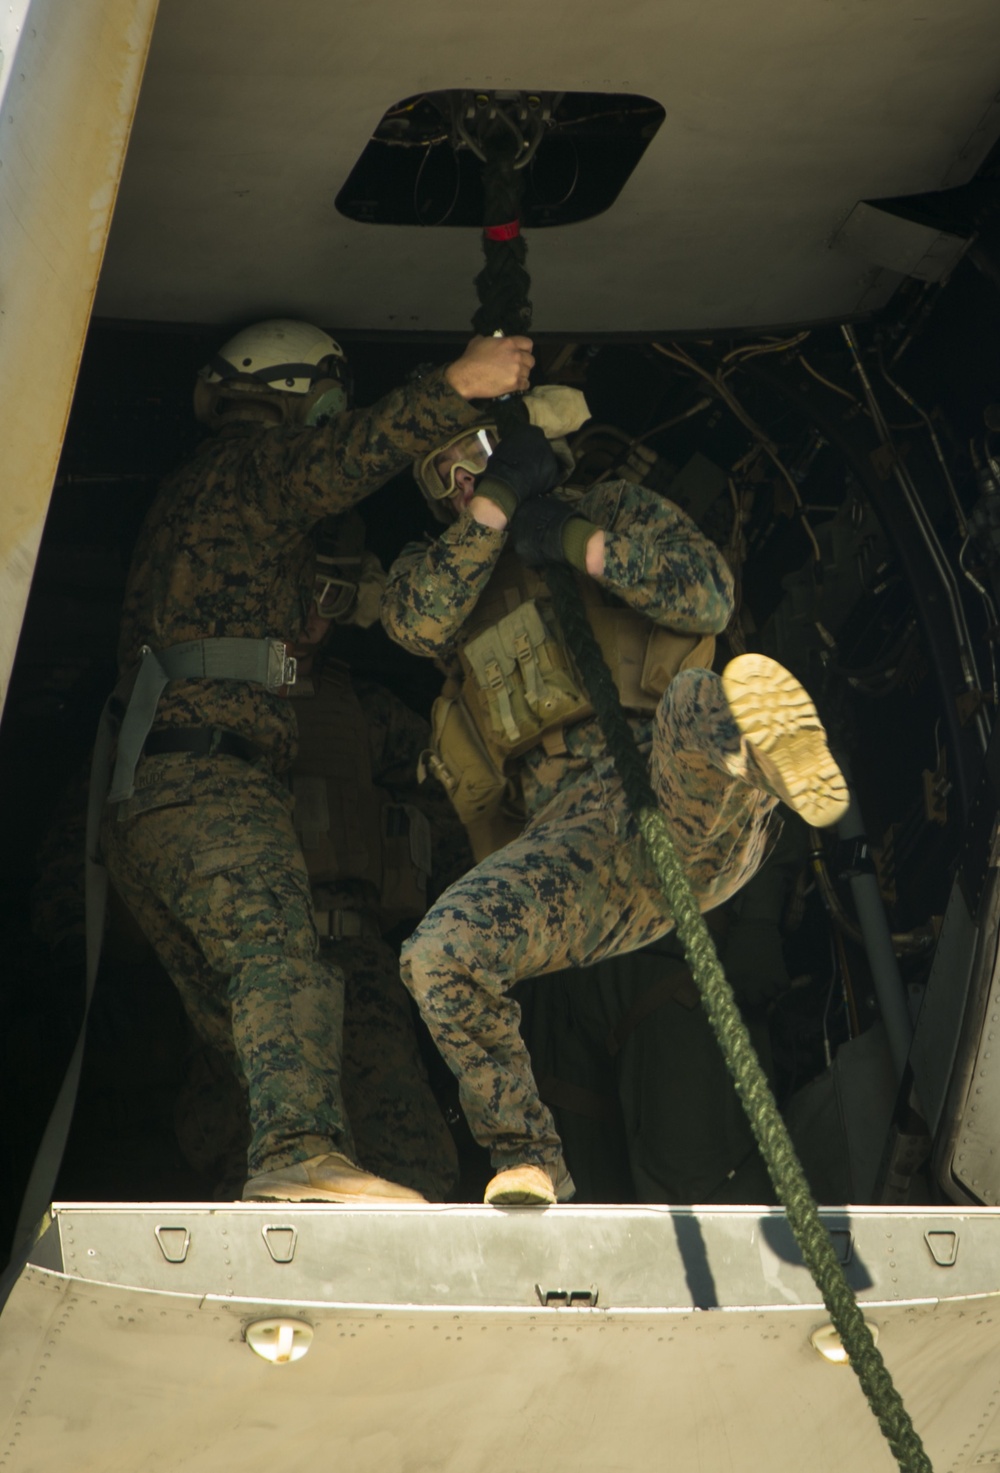 Face fear…JUMP! Crisis Response Marines test insertion capabilities in Spain